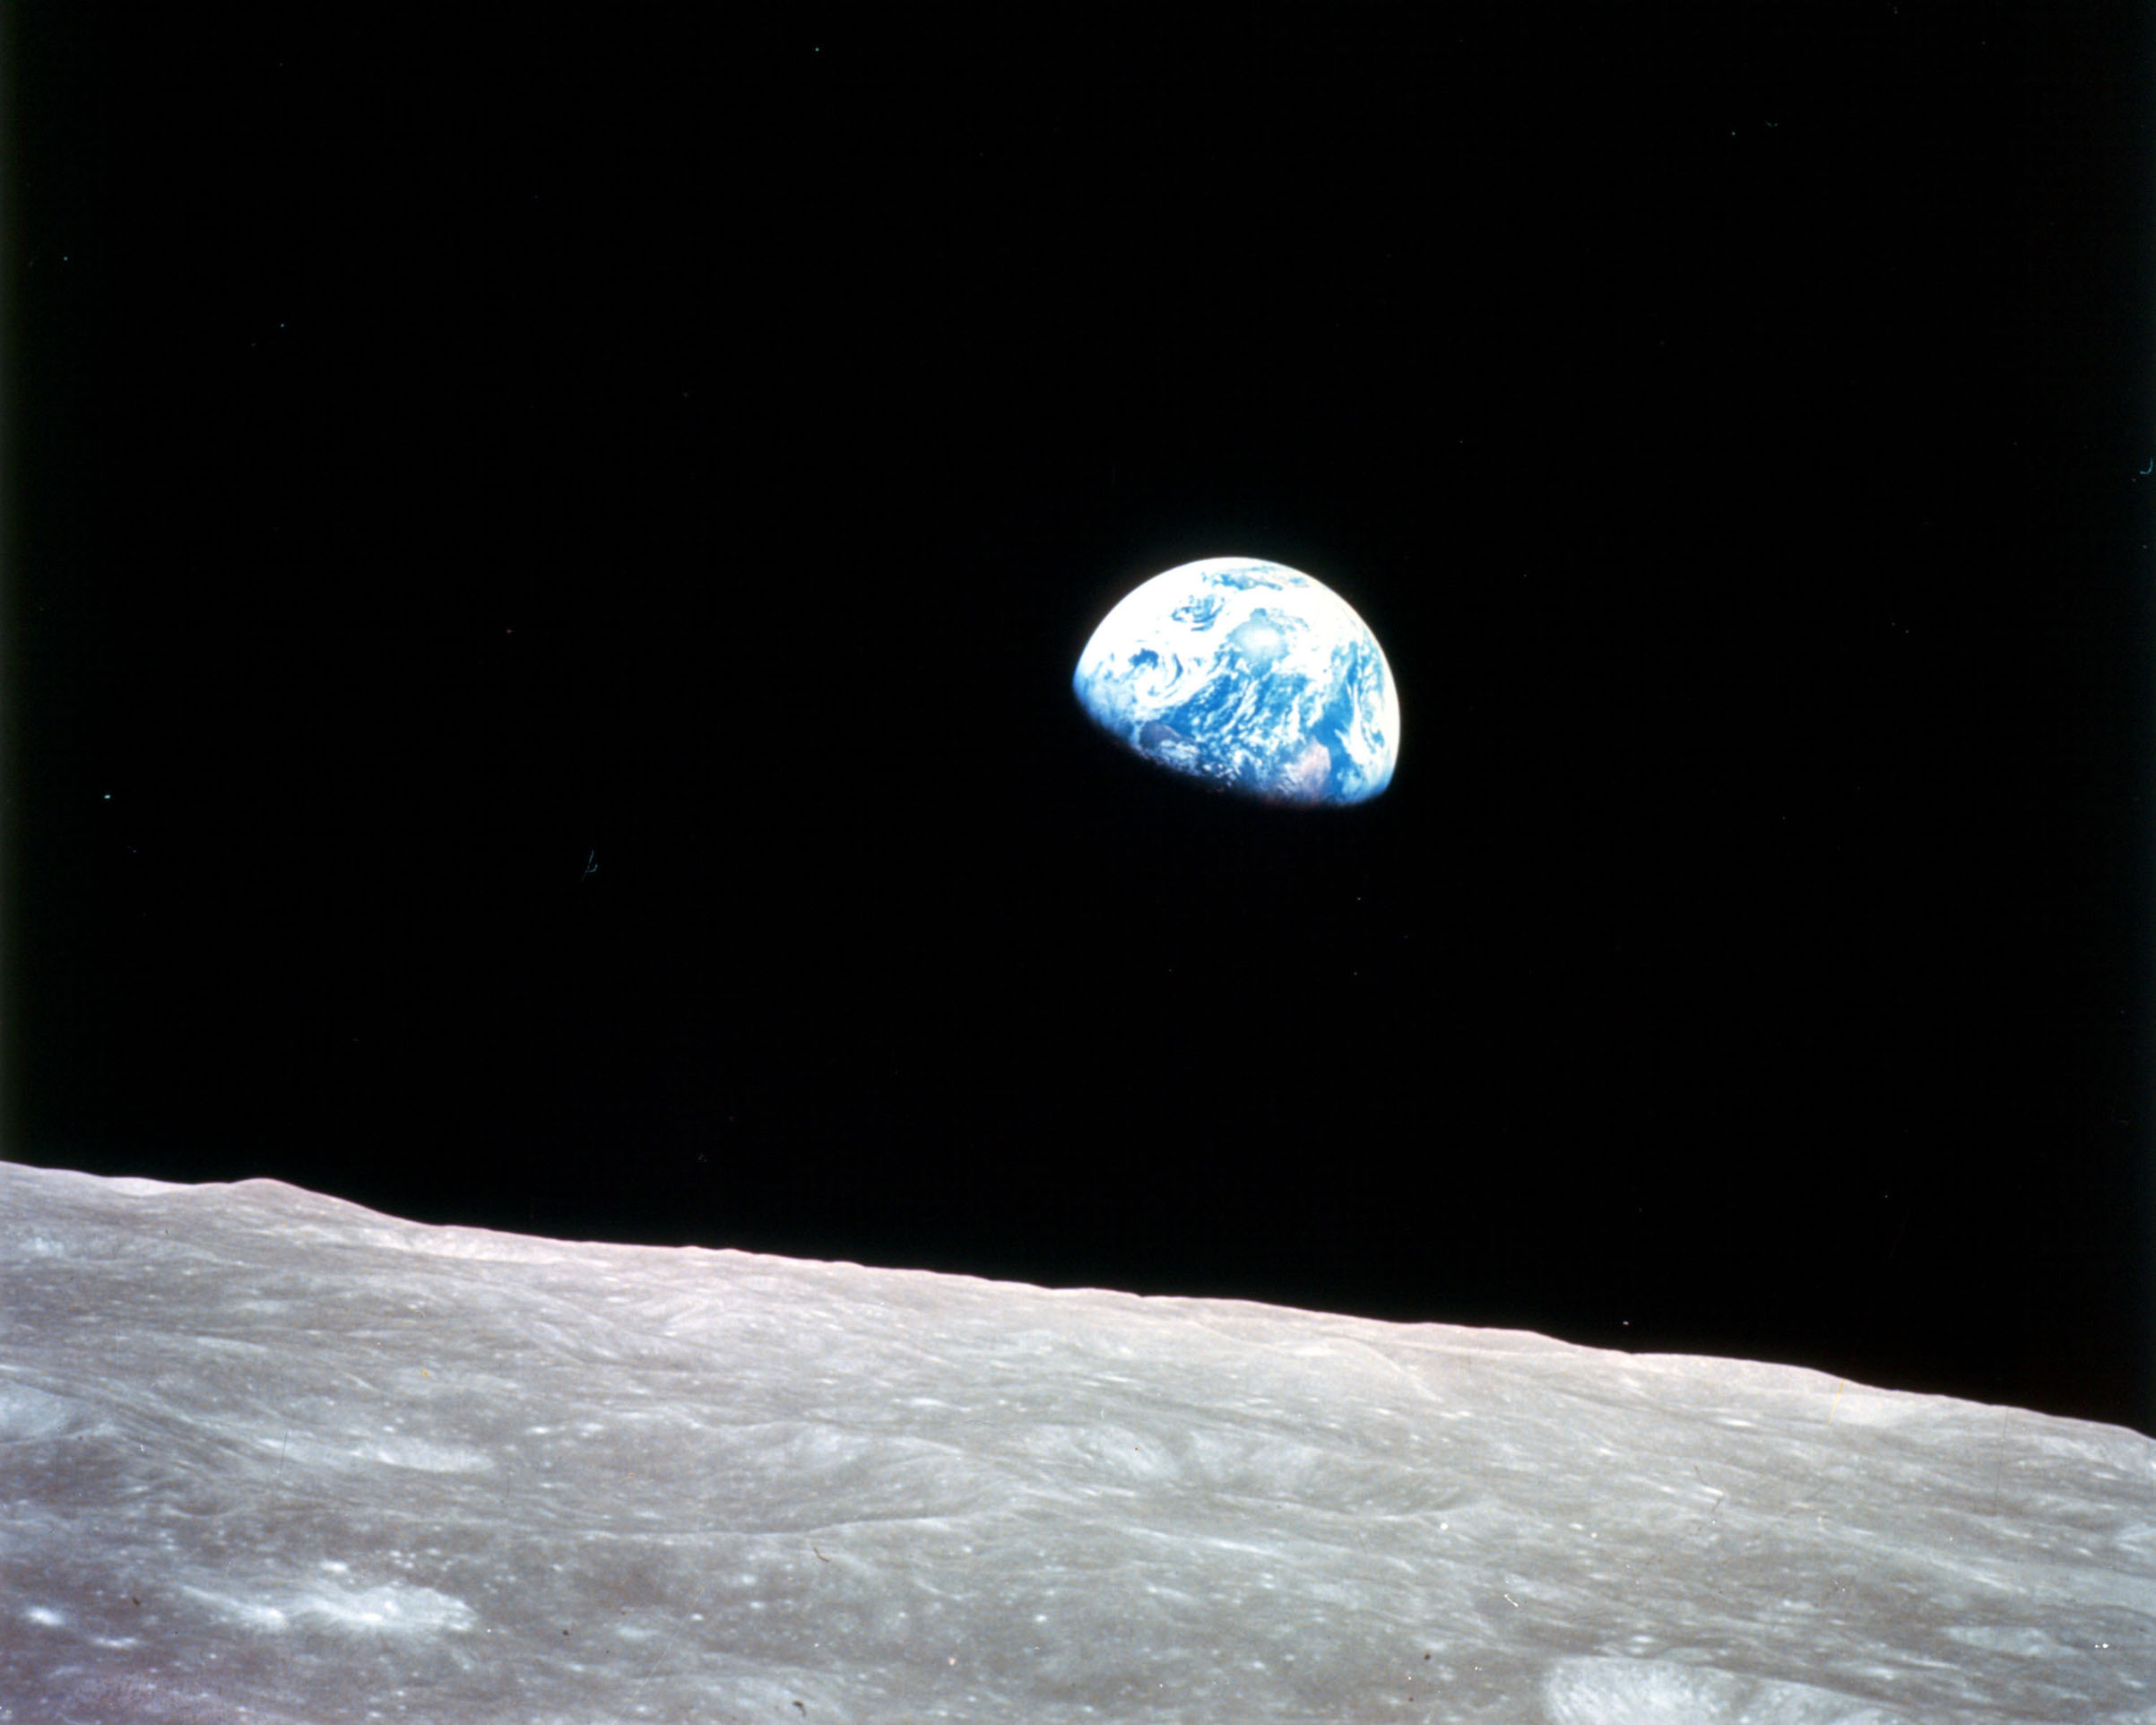 This view of the rising Earth greeted the Apollo 8 astronauts as they came from behind the Moon after the lunar orbit insertion burn. (Science &amp; Society Picture Library / Getty Images)